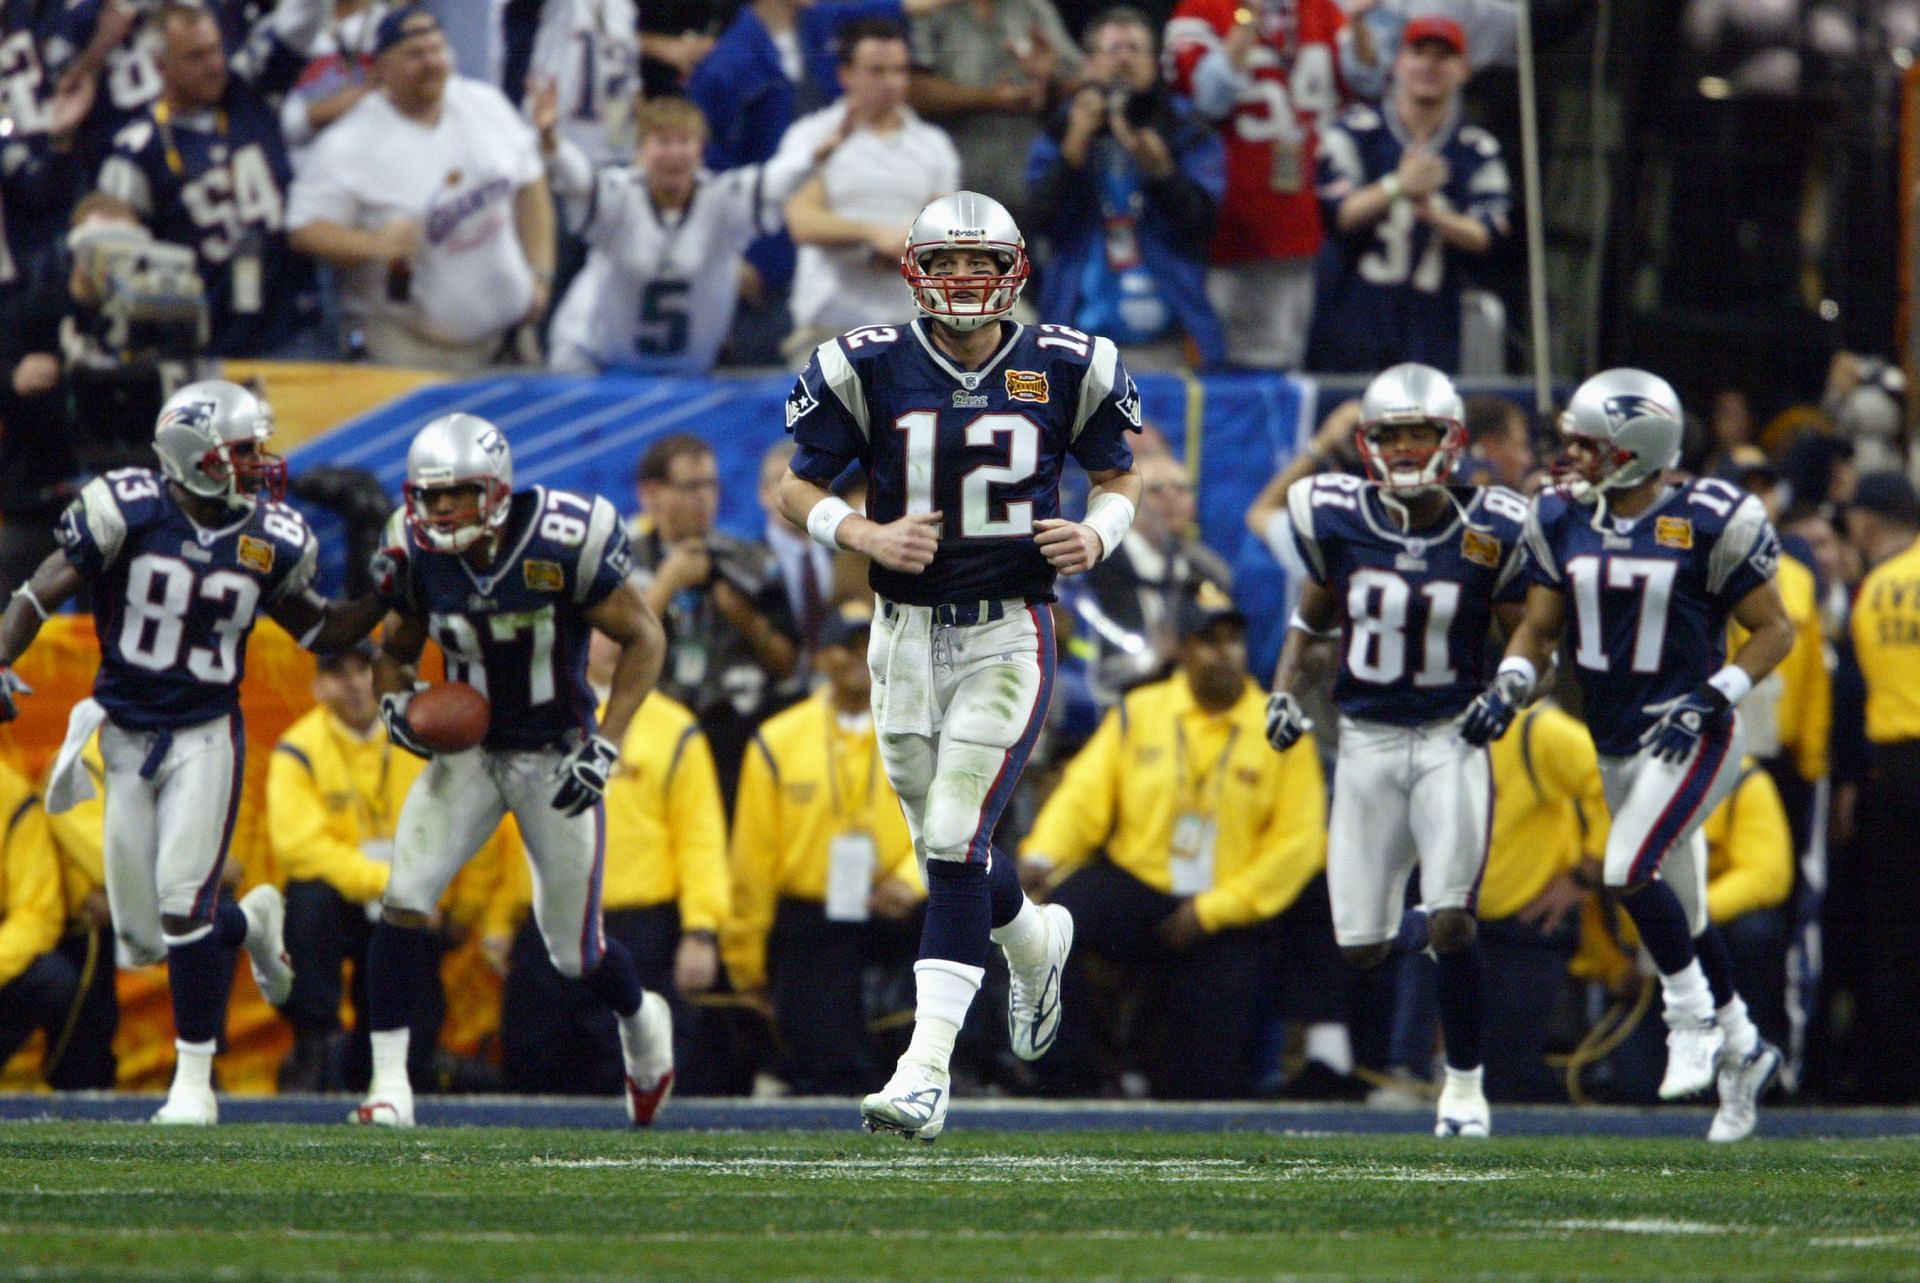 Brady on a different kind of dash, one back to the sidelines after a Super Bowl touchdown (Photo: Getty)